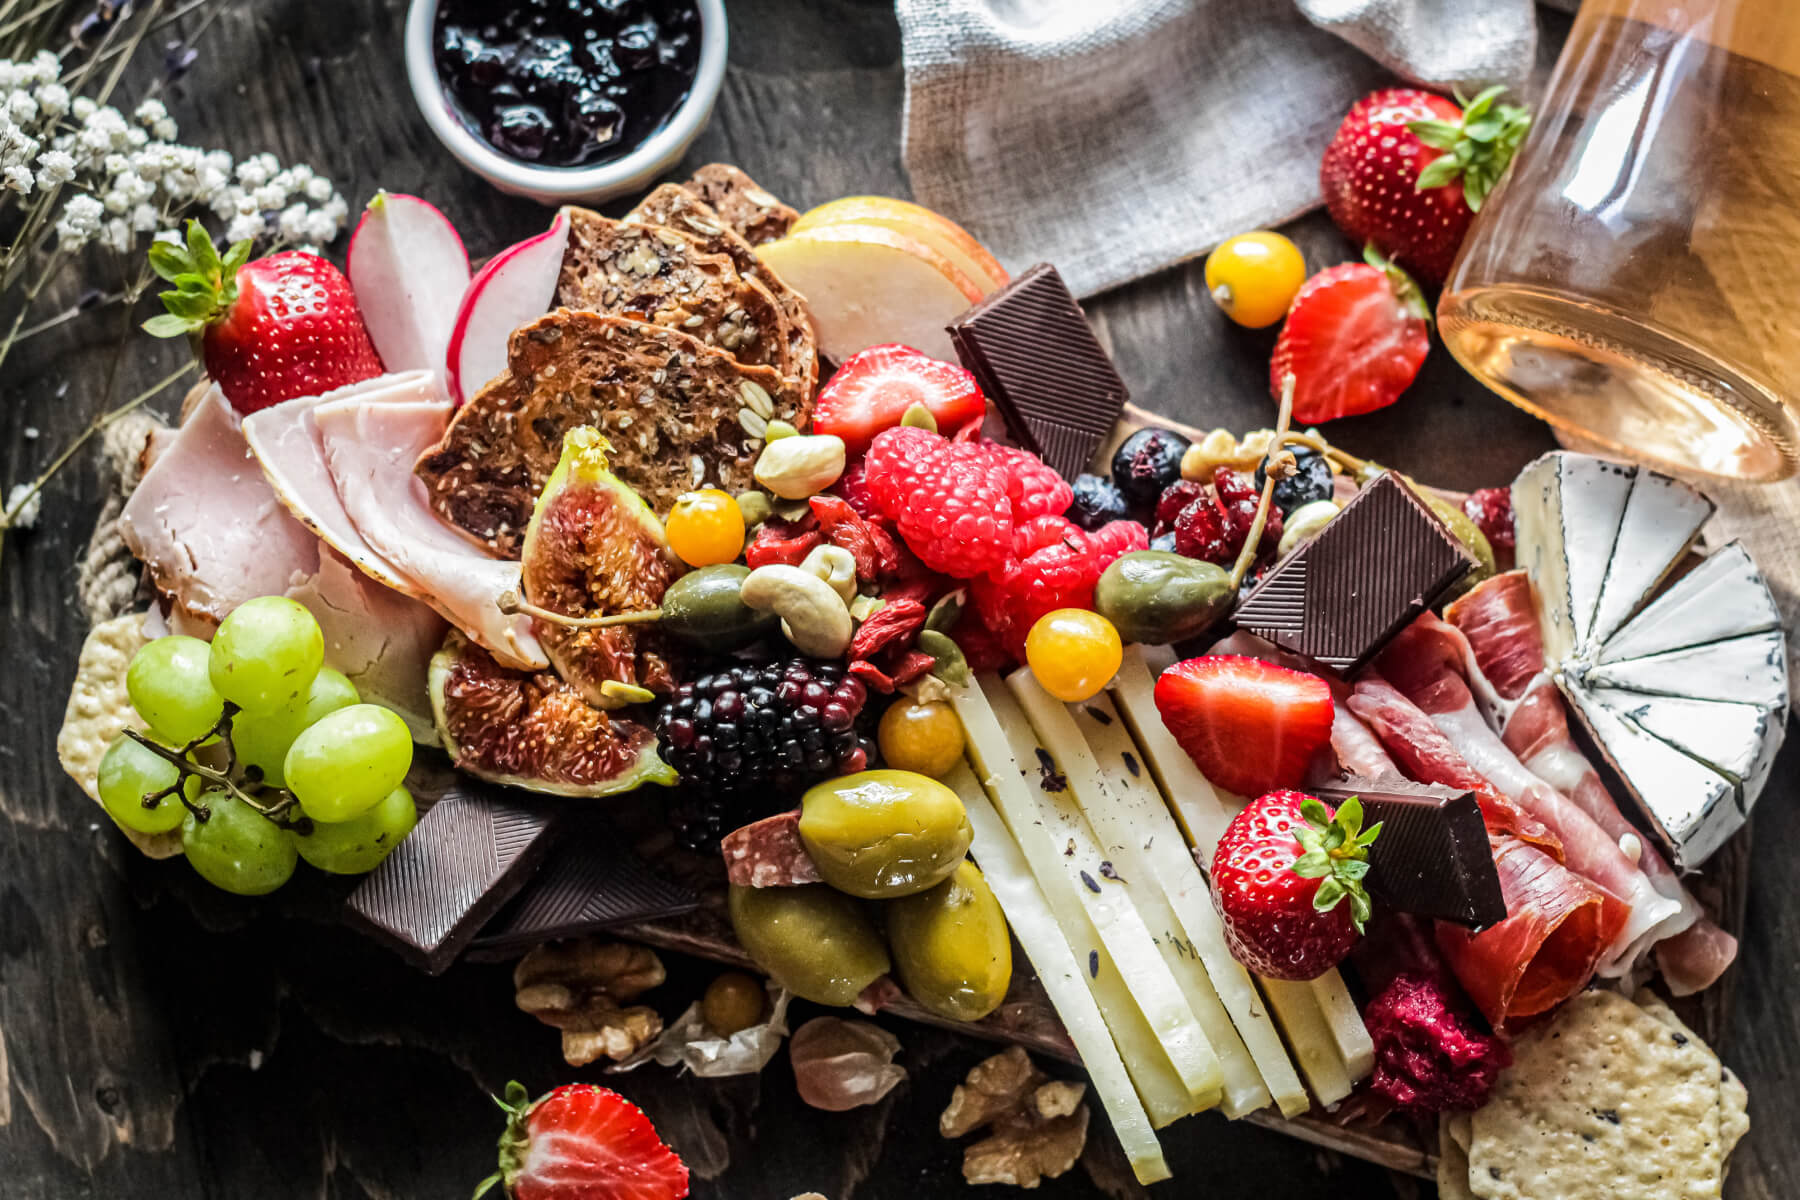 cheese plate with chocolate, fruit and more